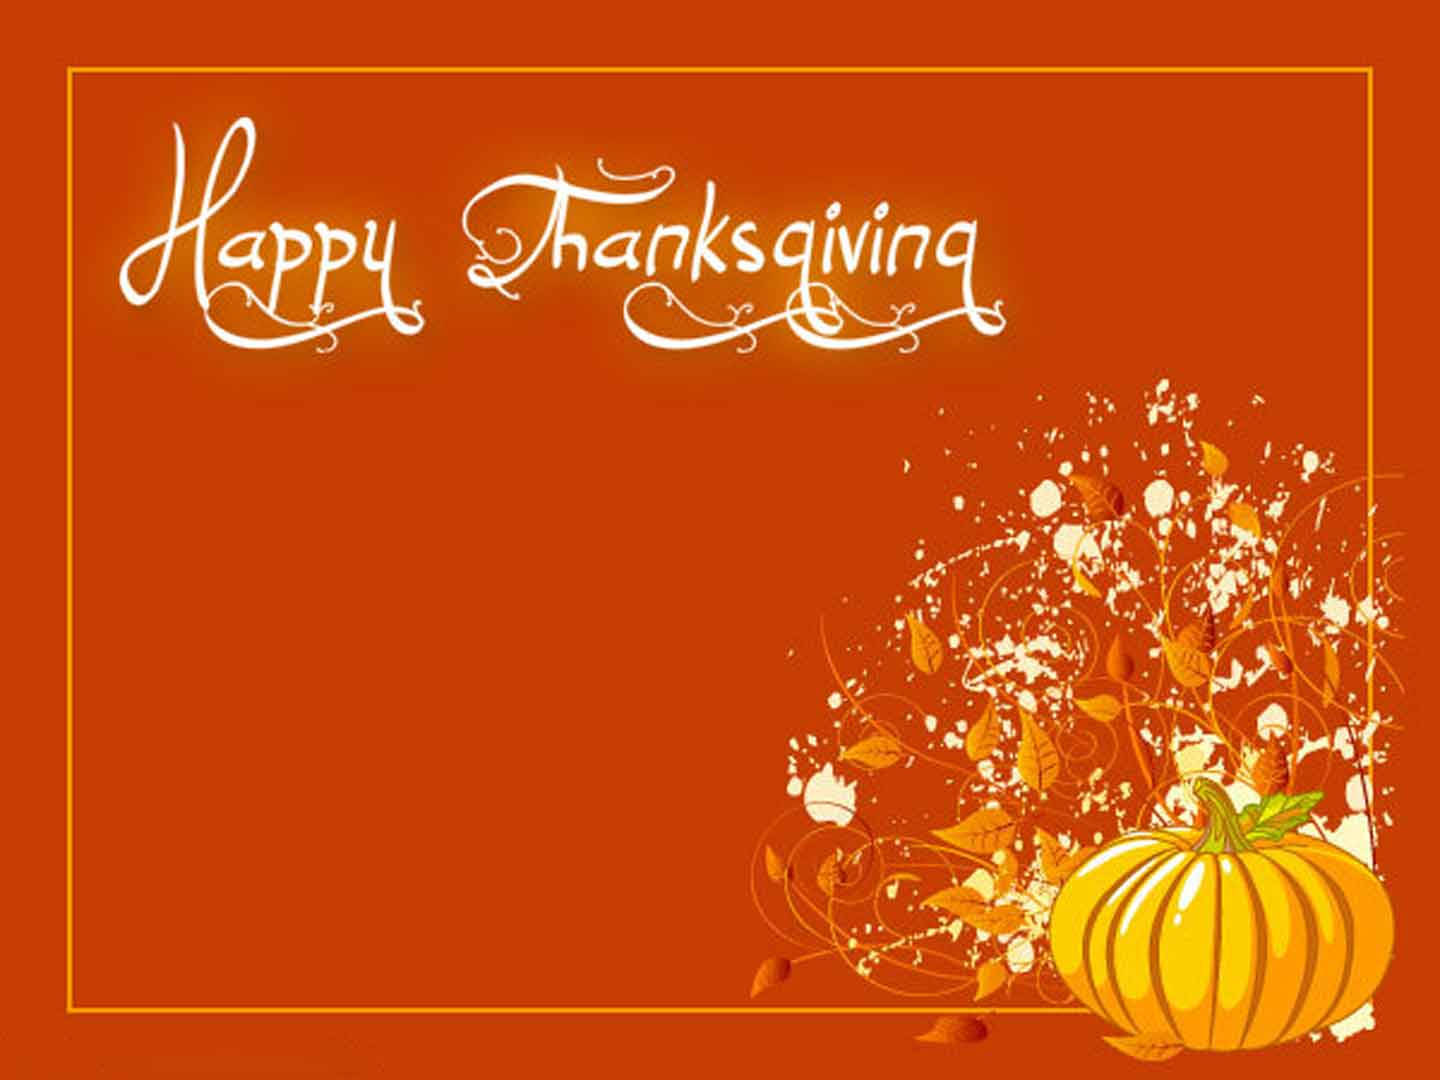 Canada Day Thanksgiving Greetings with Glowing Pumpkin Wallpaper